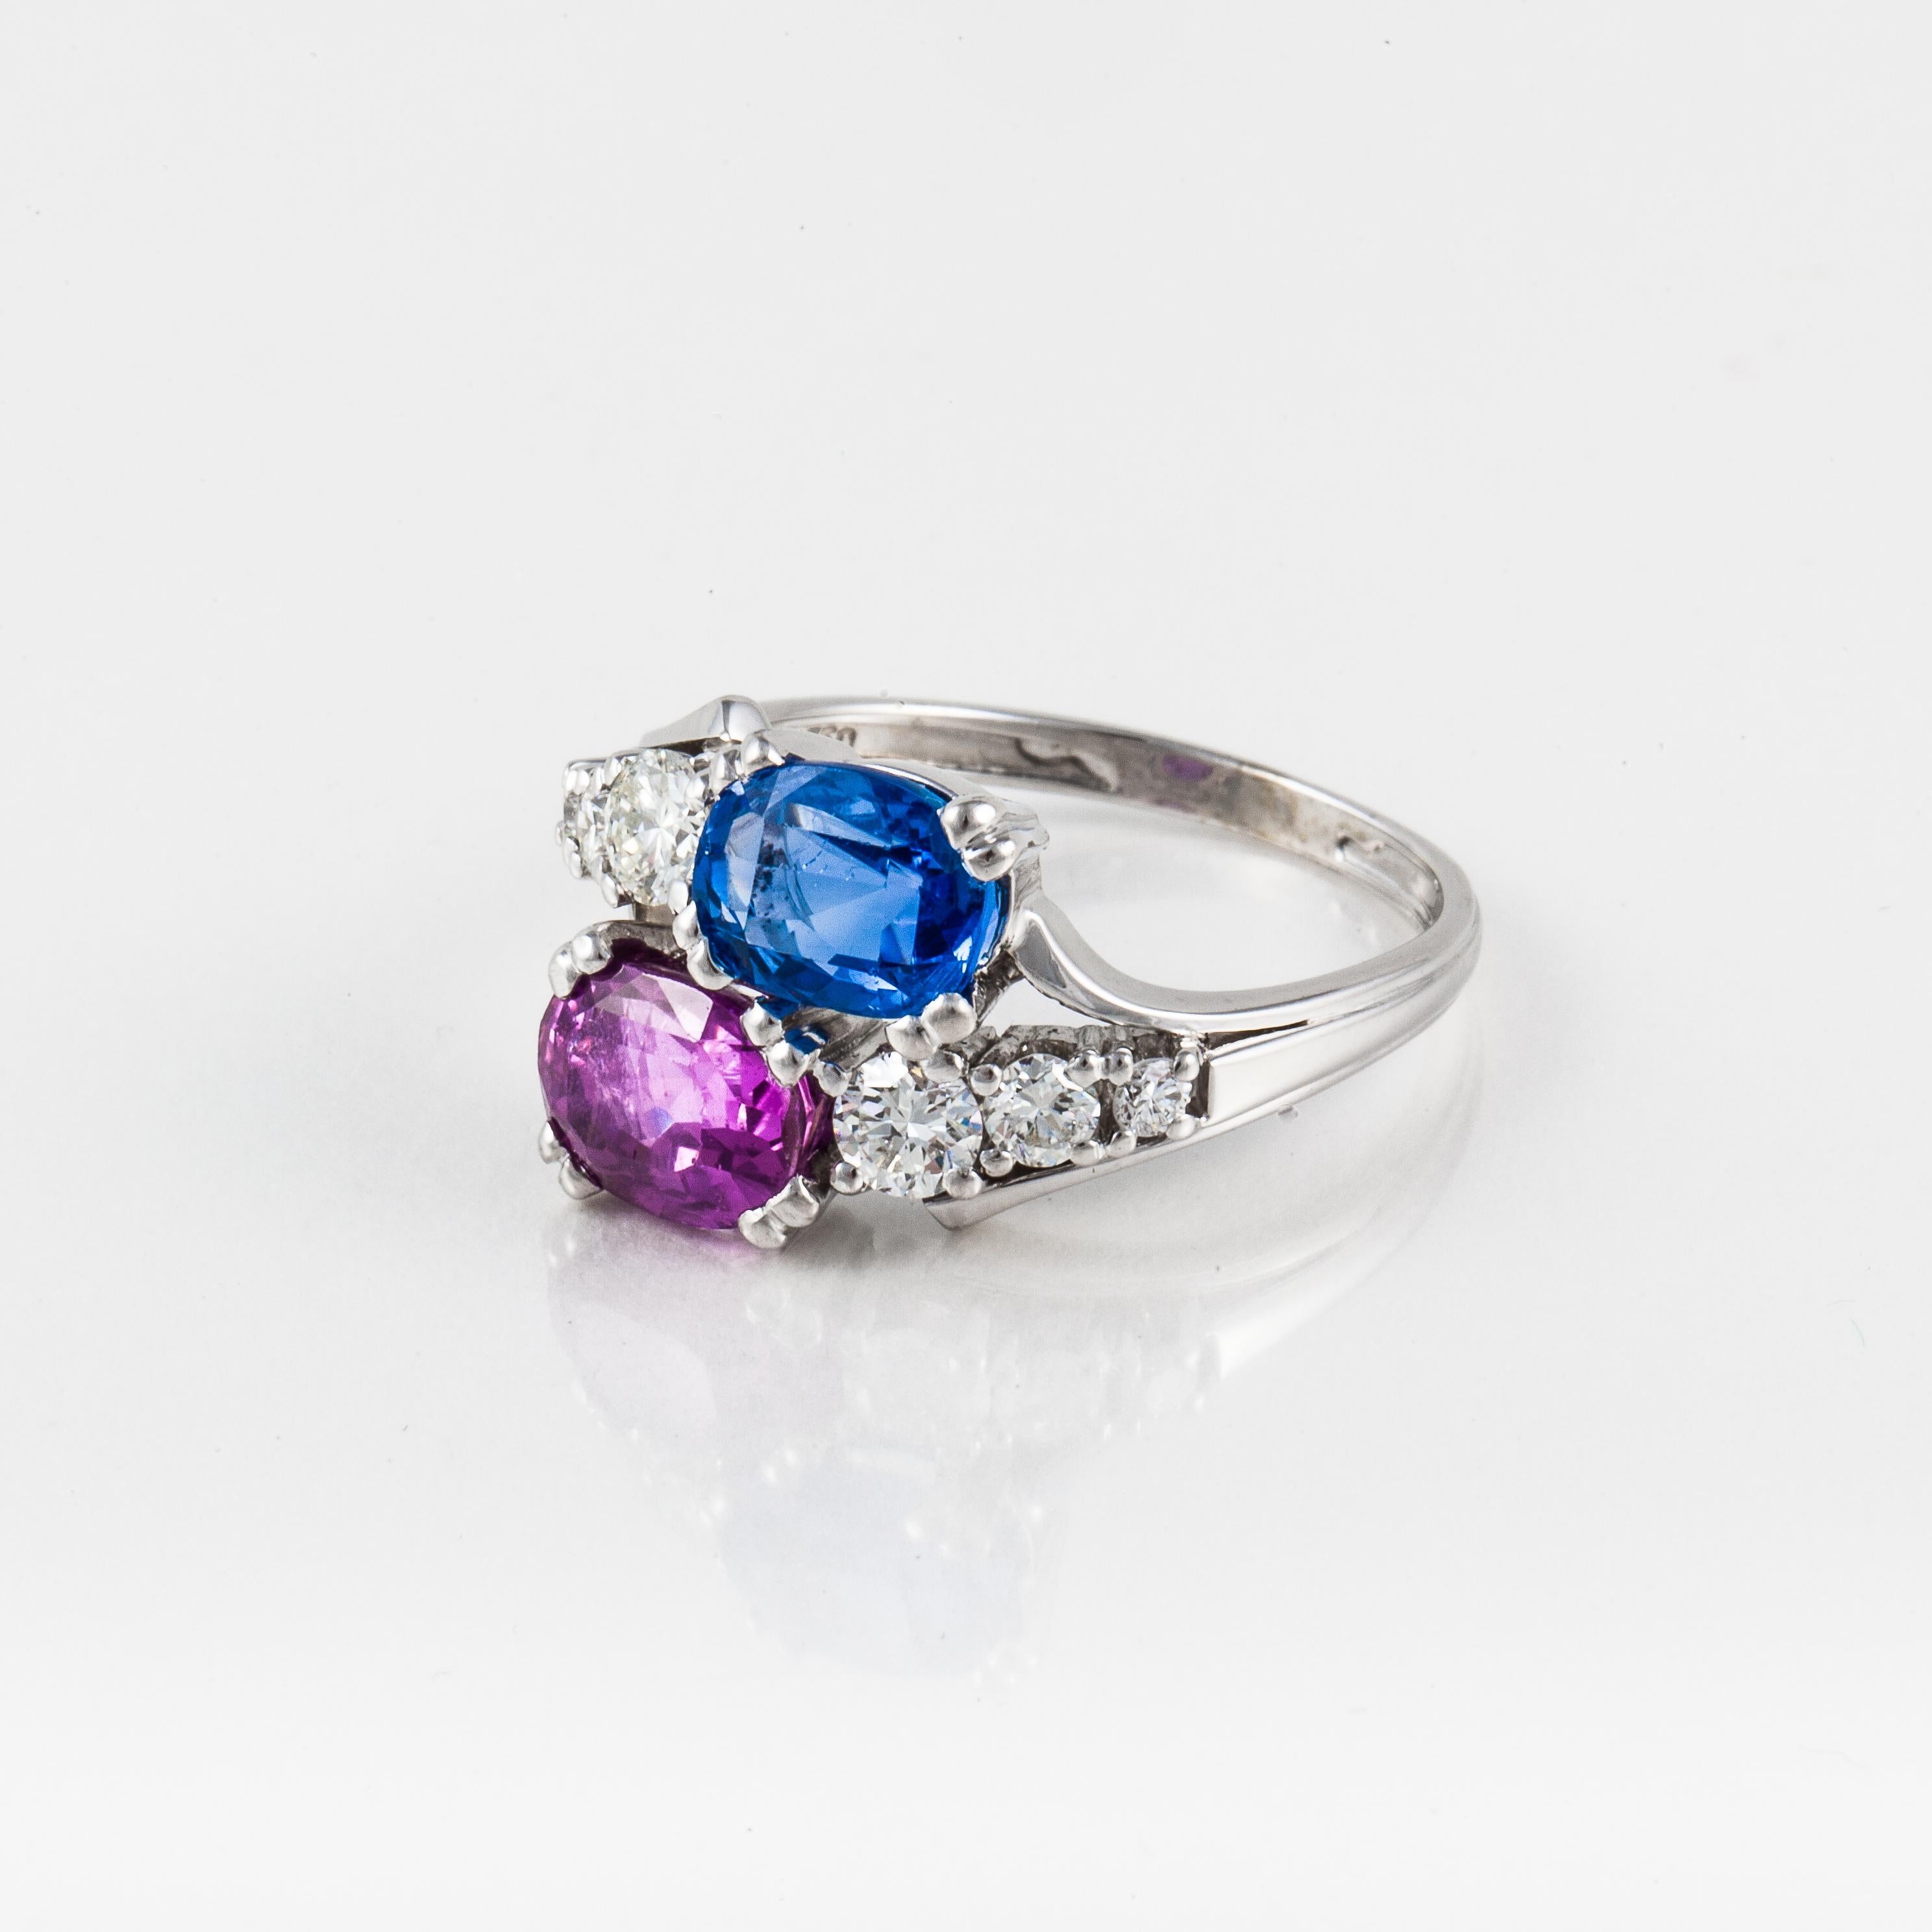 18K white gold bypass ring featuring an oval cut blue sapphire and an oval cut pink sapphire accented with round diamonds. The six round diamonds total 0.75 carats; G-H color and VVS-VS clarity.  Ring is currently a size 8 3/4 and may be sized.  It